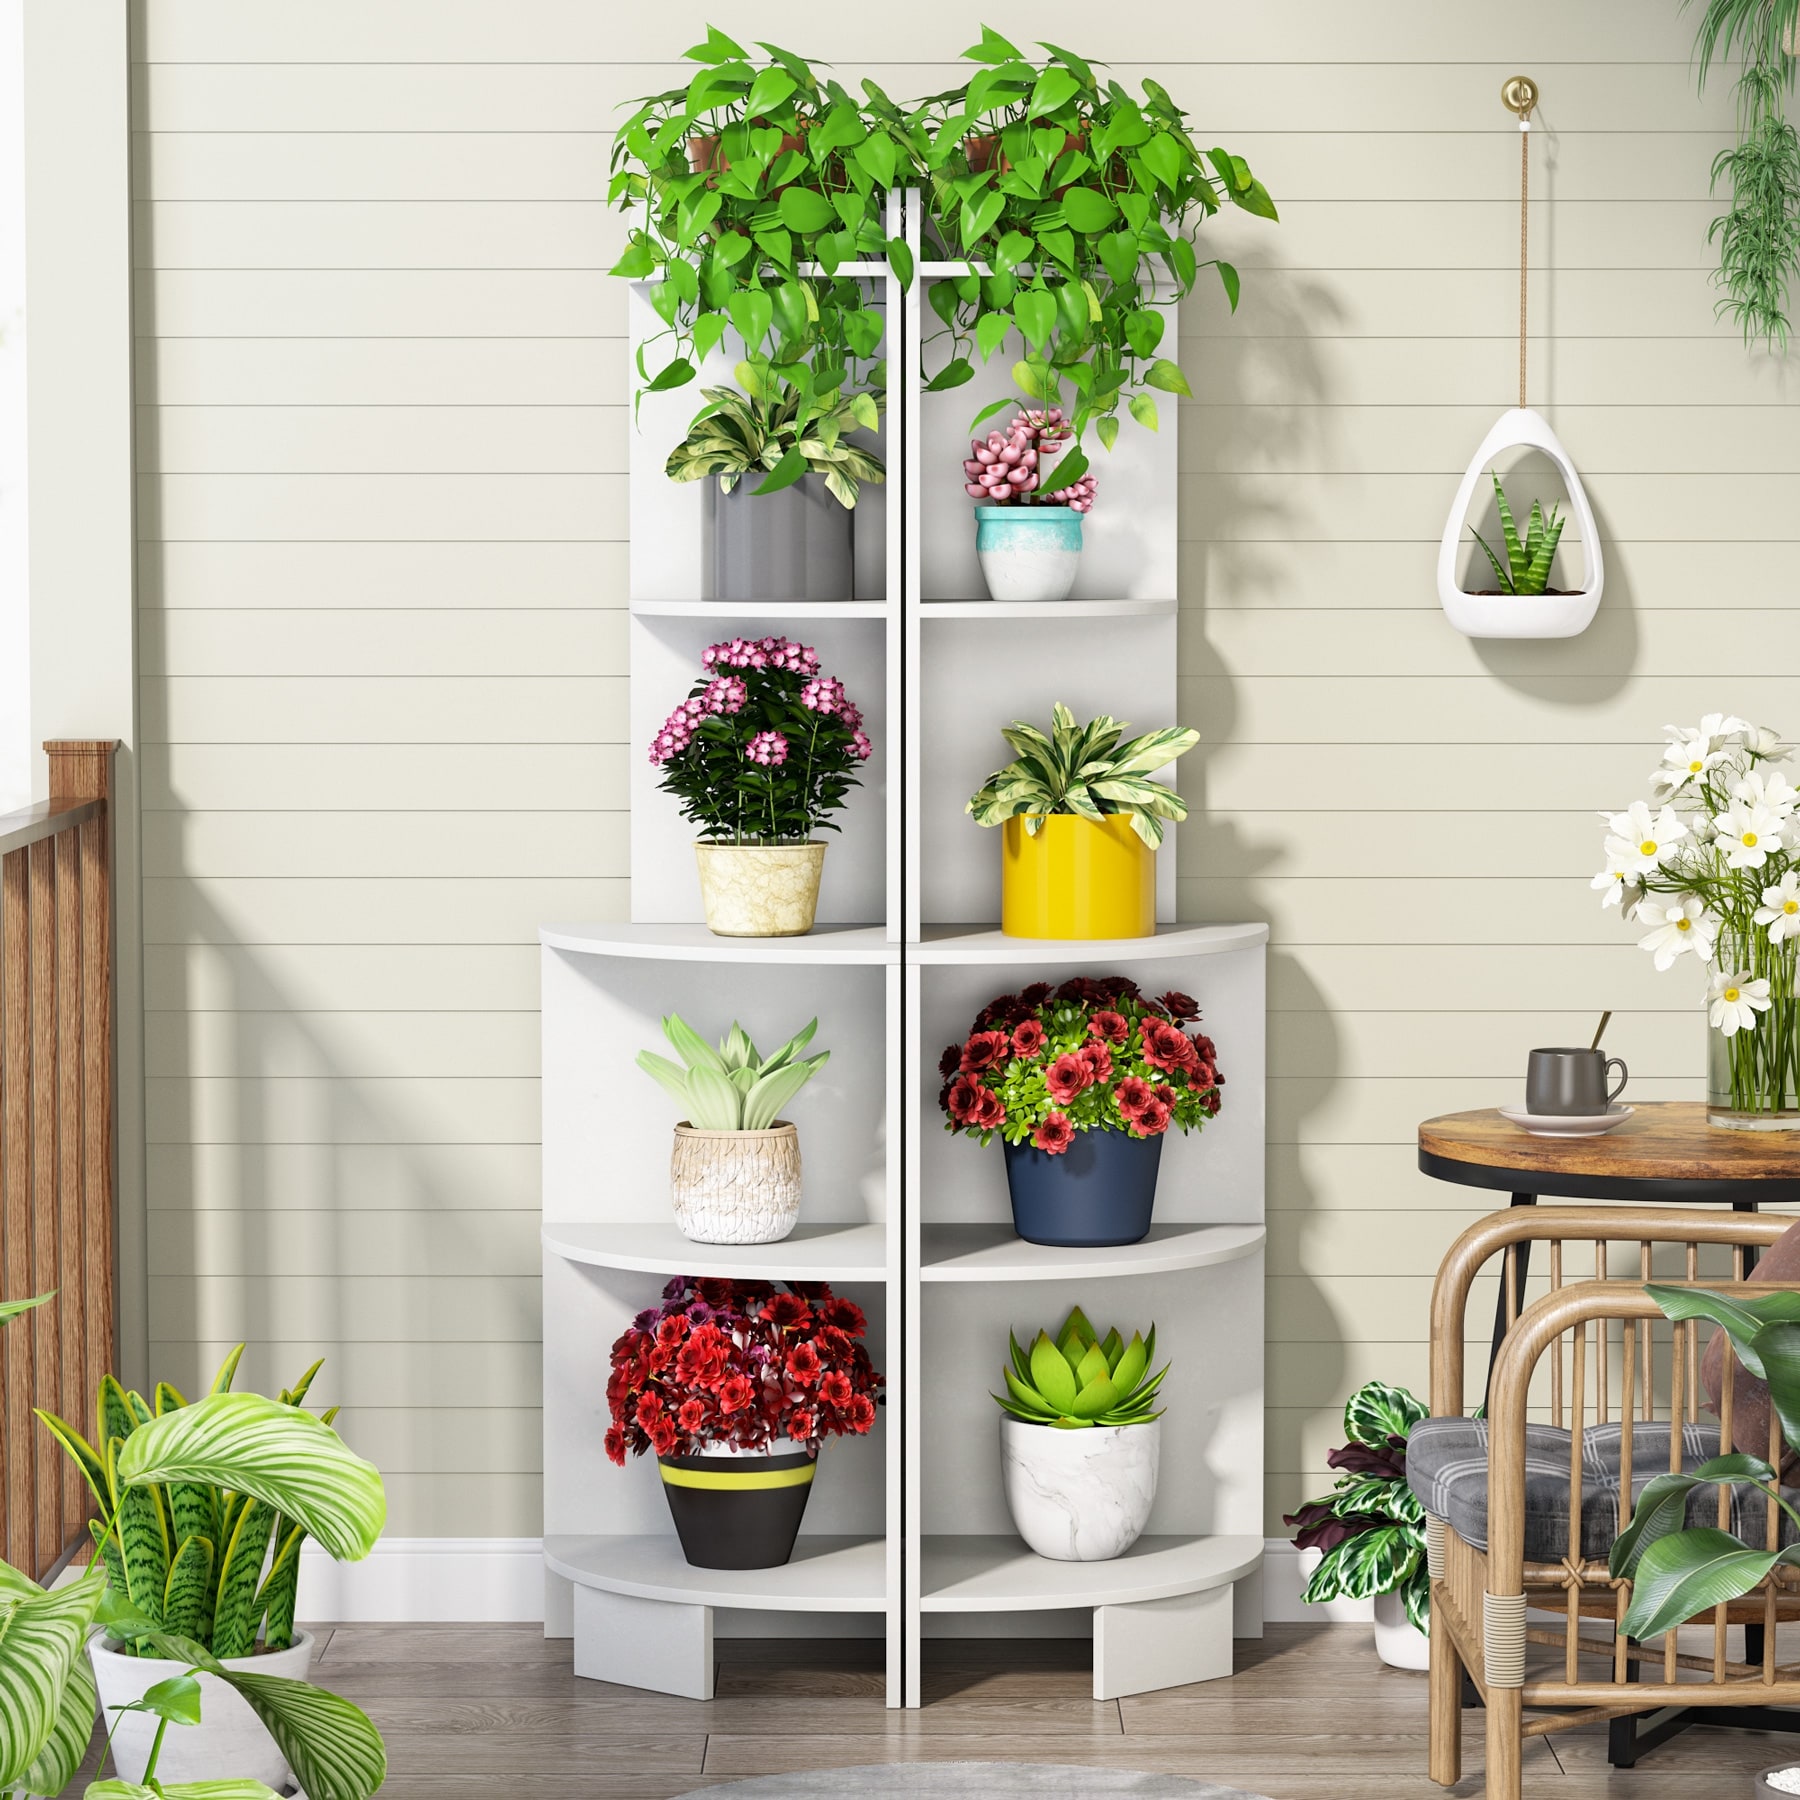 https://ak1.ostkcdn.com/images/products/is/images/direct/e91fa3af40b6f20ea115db9217e1f99adff9e1cc/60-Inch-Tall-Corner-Shelf%2C-5-Tier-Small-Bookcase%2C-Industrial-Plant-Stand-for-Living-Room%2C-Bedroom%2C-Home-Office.jpg